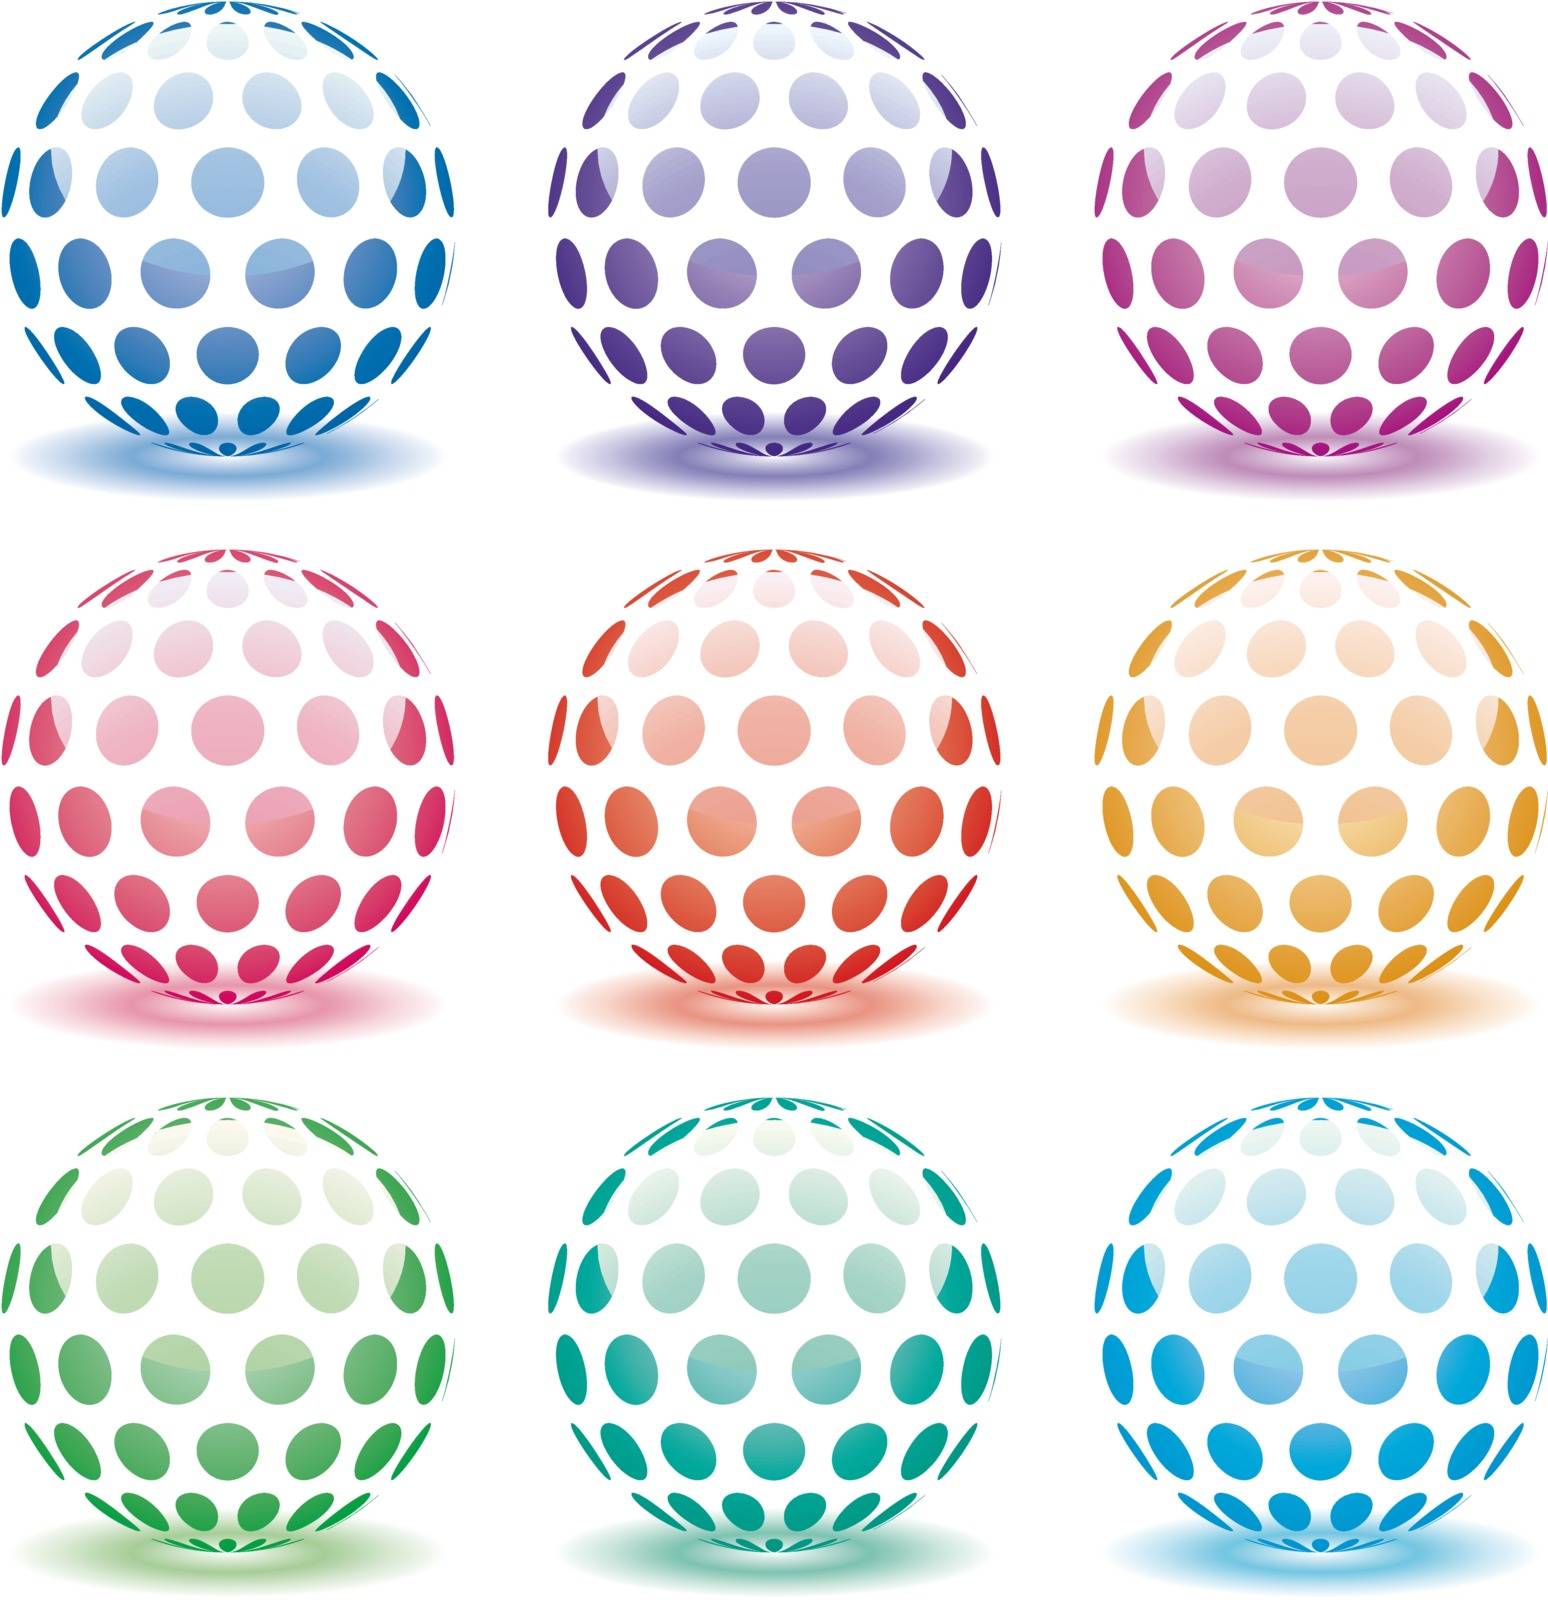 vector set of 3d shiny globes of different colors